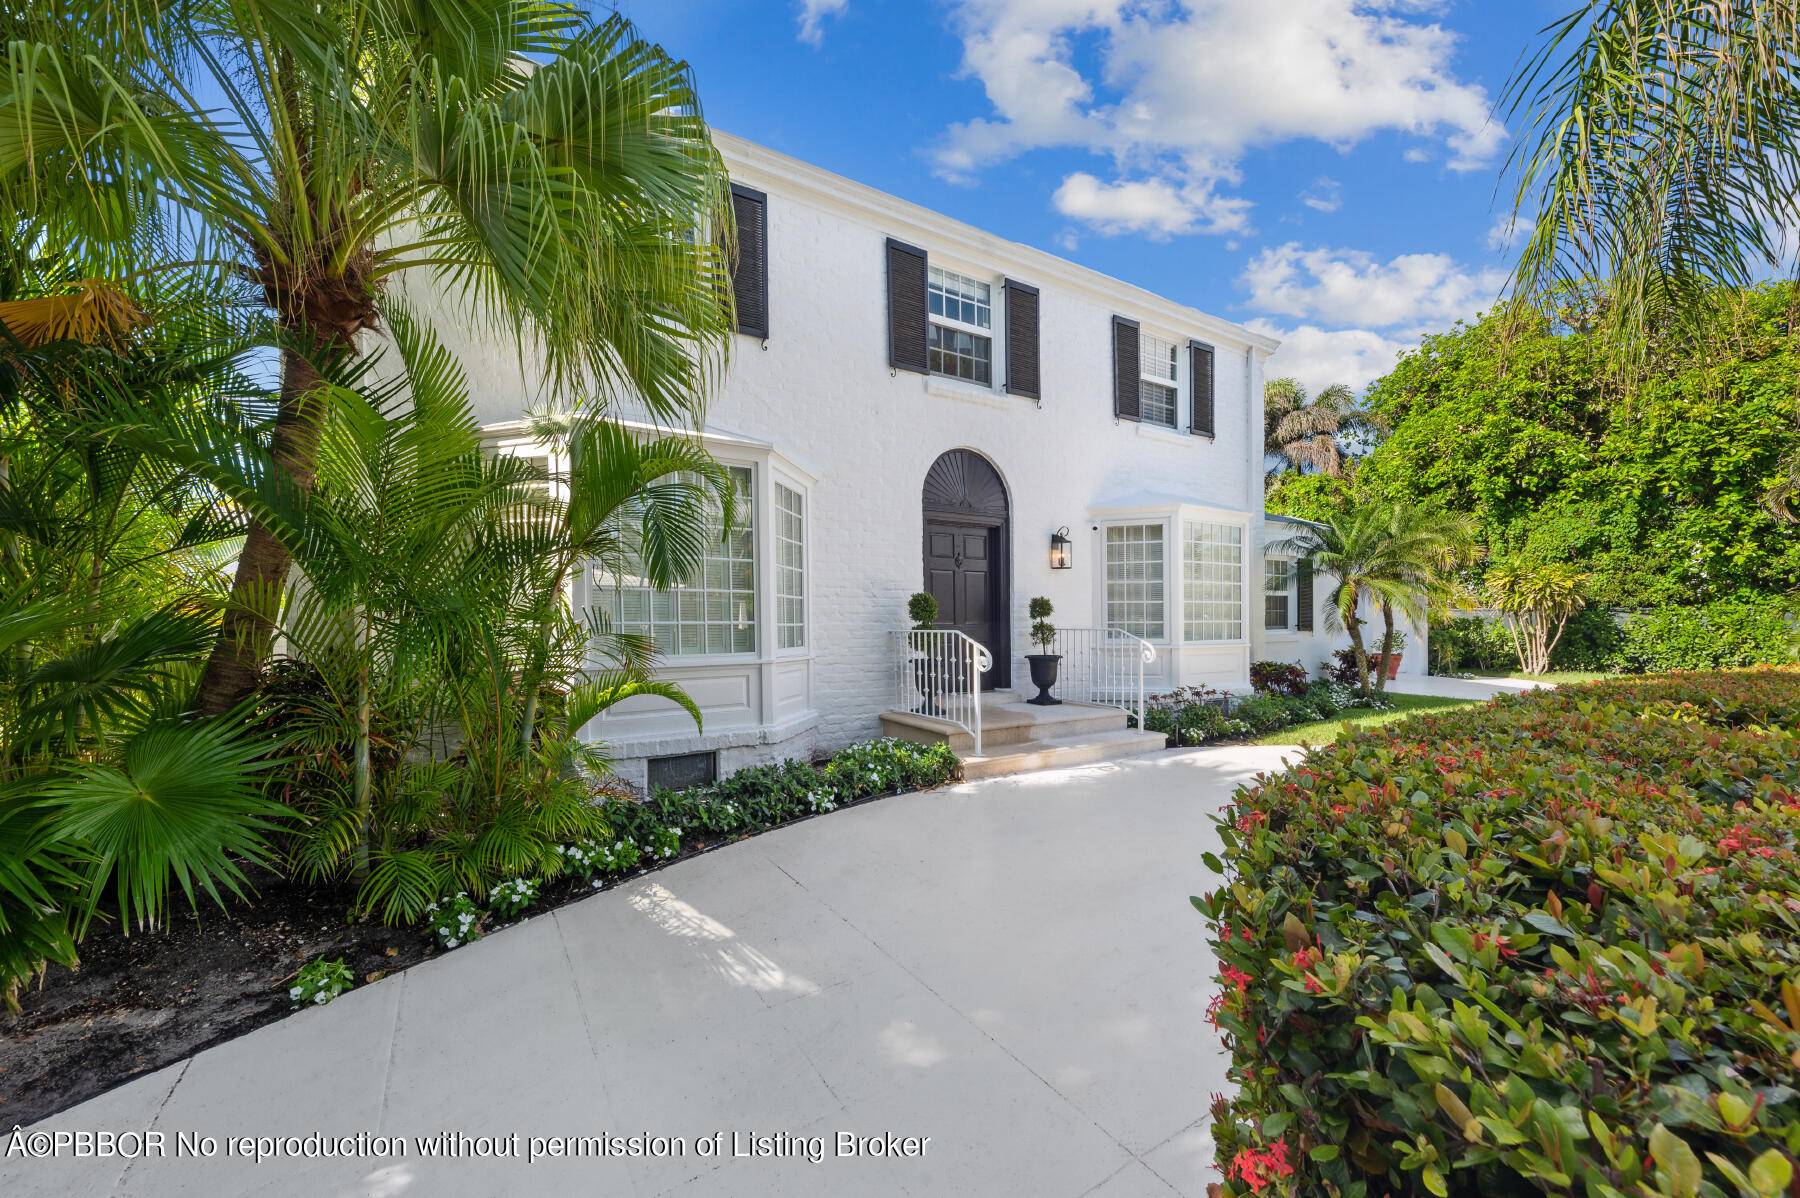 Nestled in the prestigious north end of Palm Beach, this exquisite colonial style residence, designed by esteemed architect Maurice Fatio, blends timeless elegance with modern luxury.